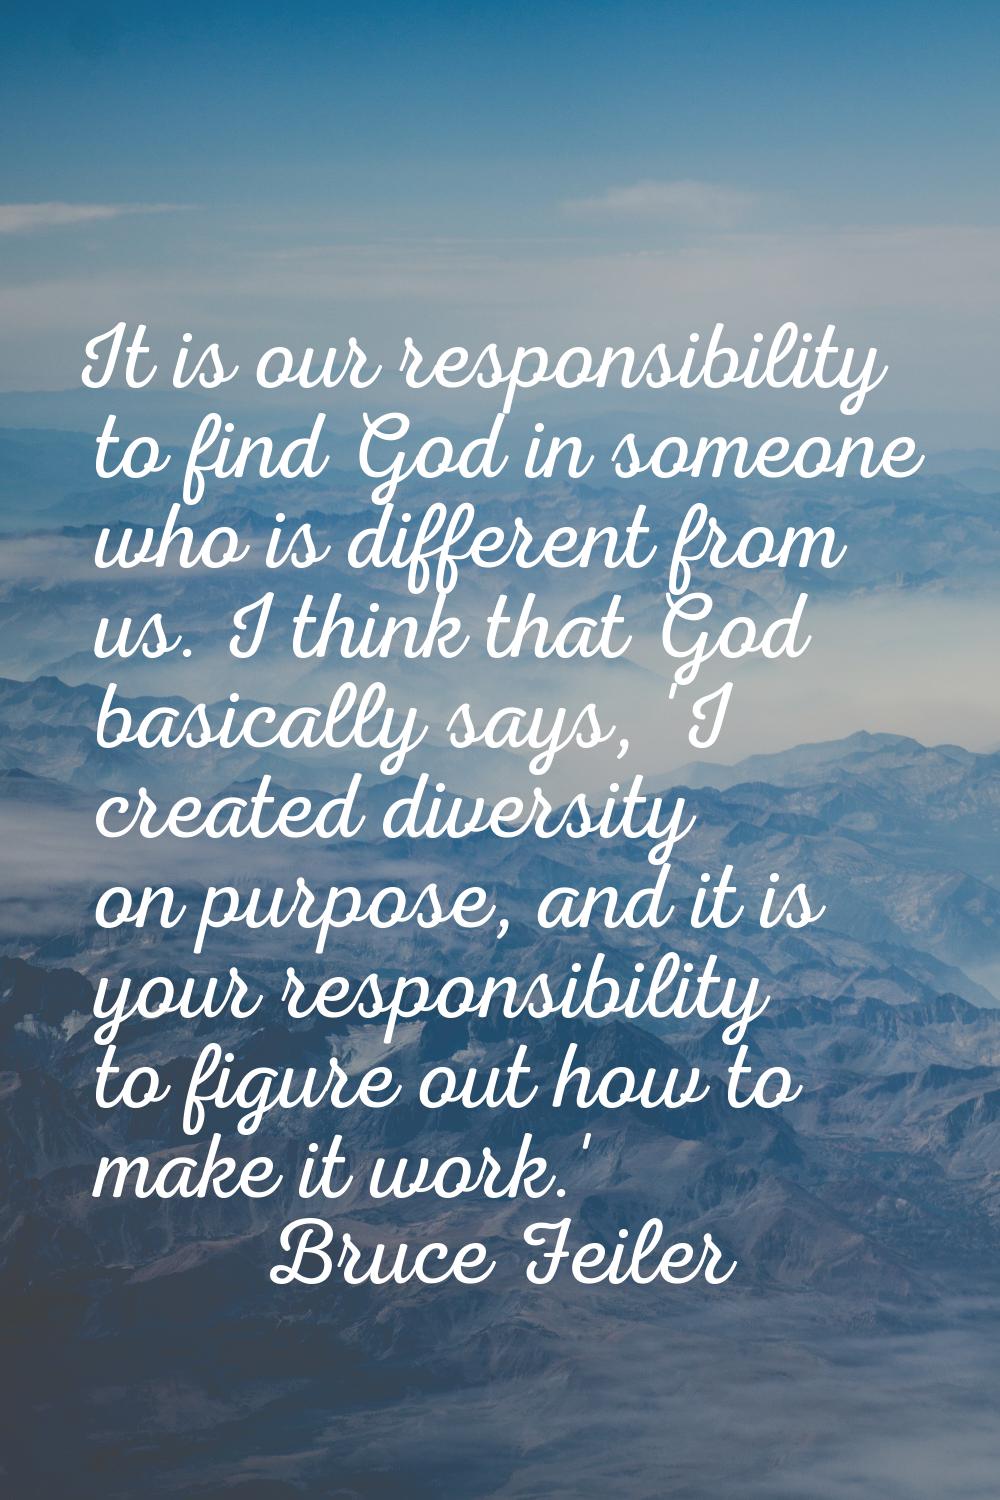 It is our responsibility to find God in someone who is different from us. I think that God basicall